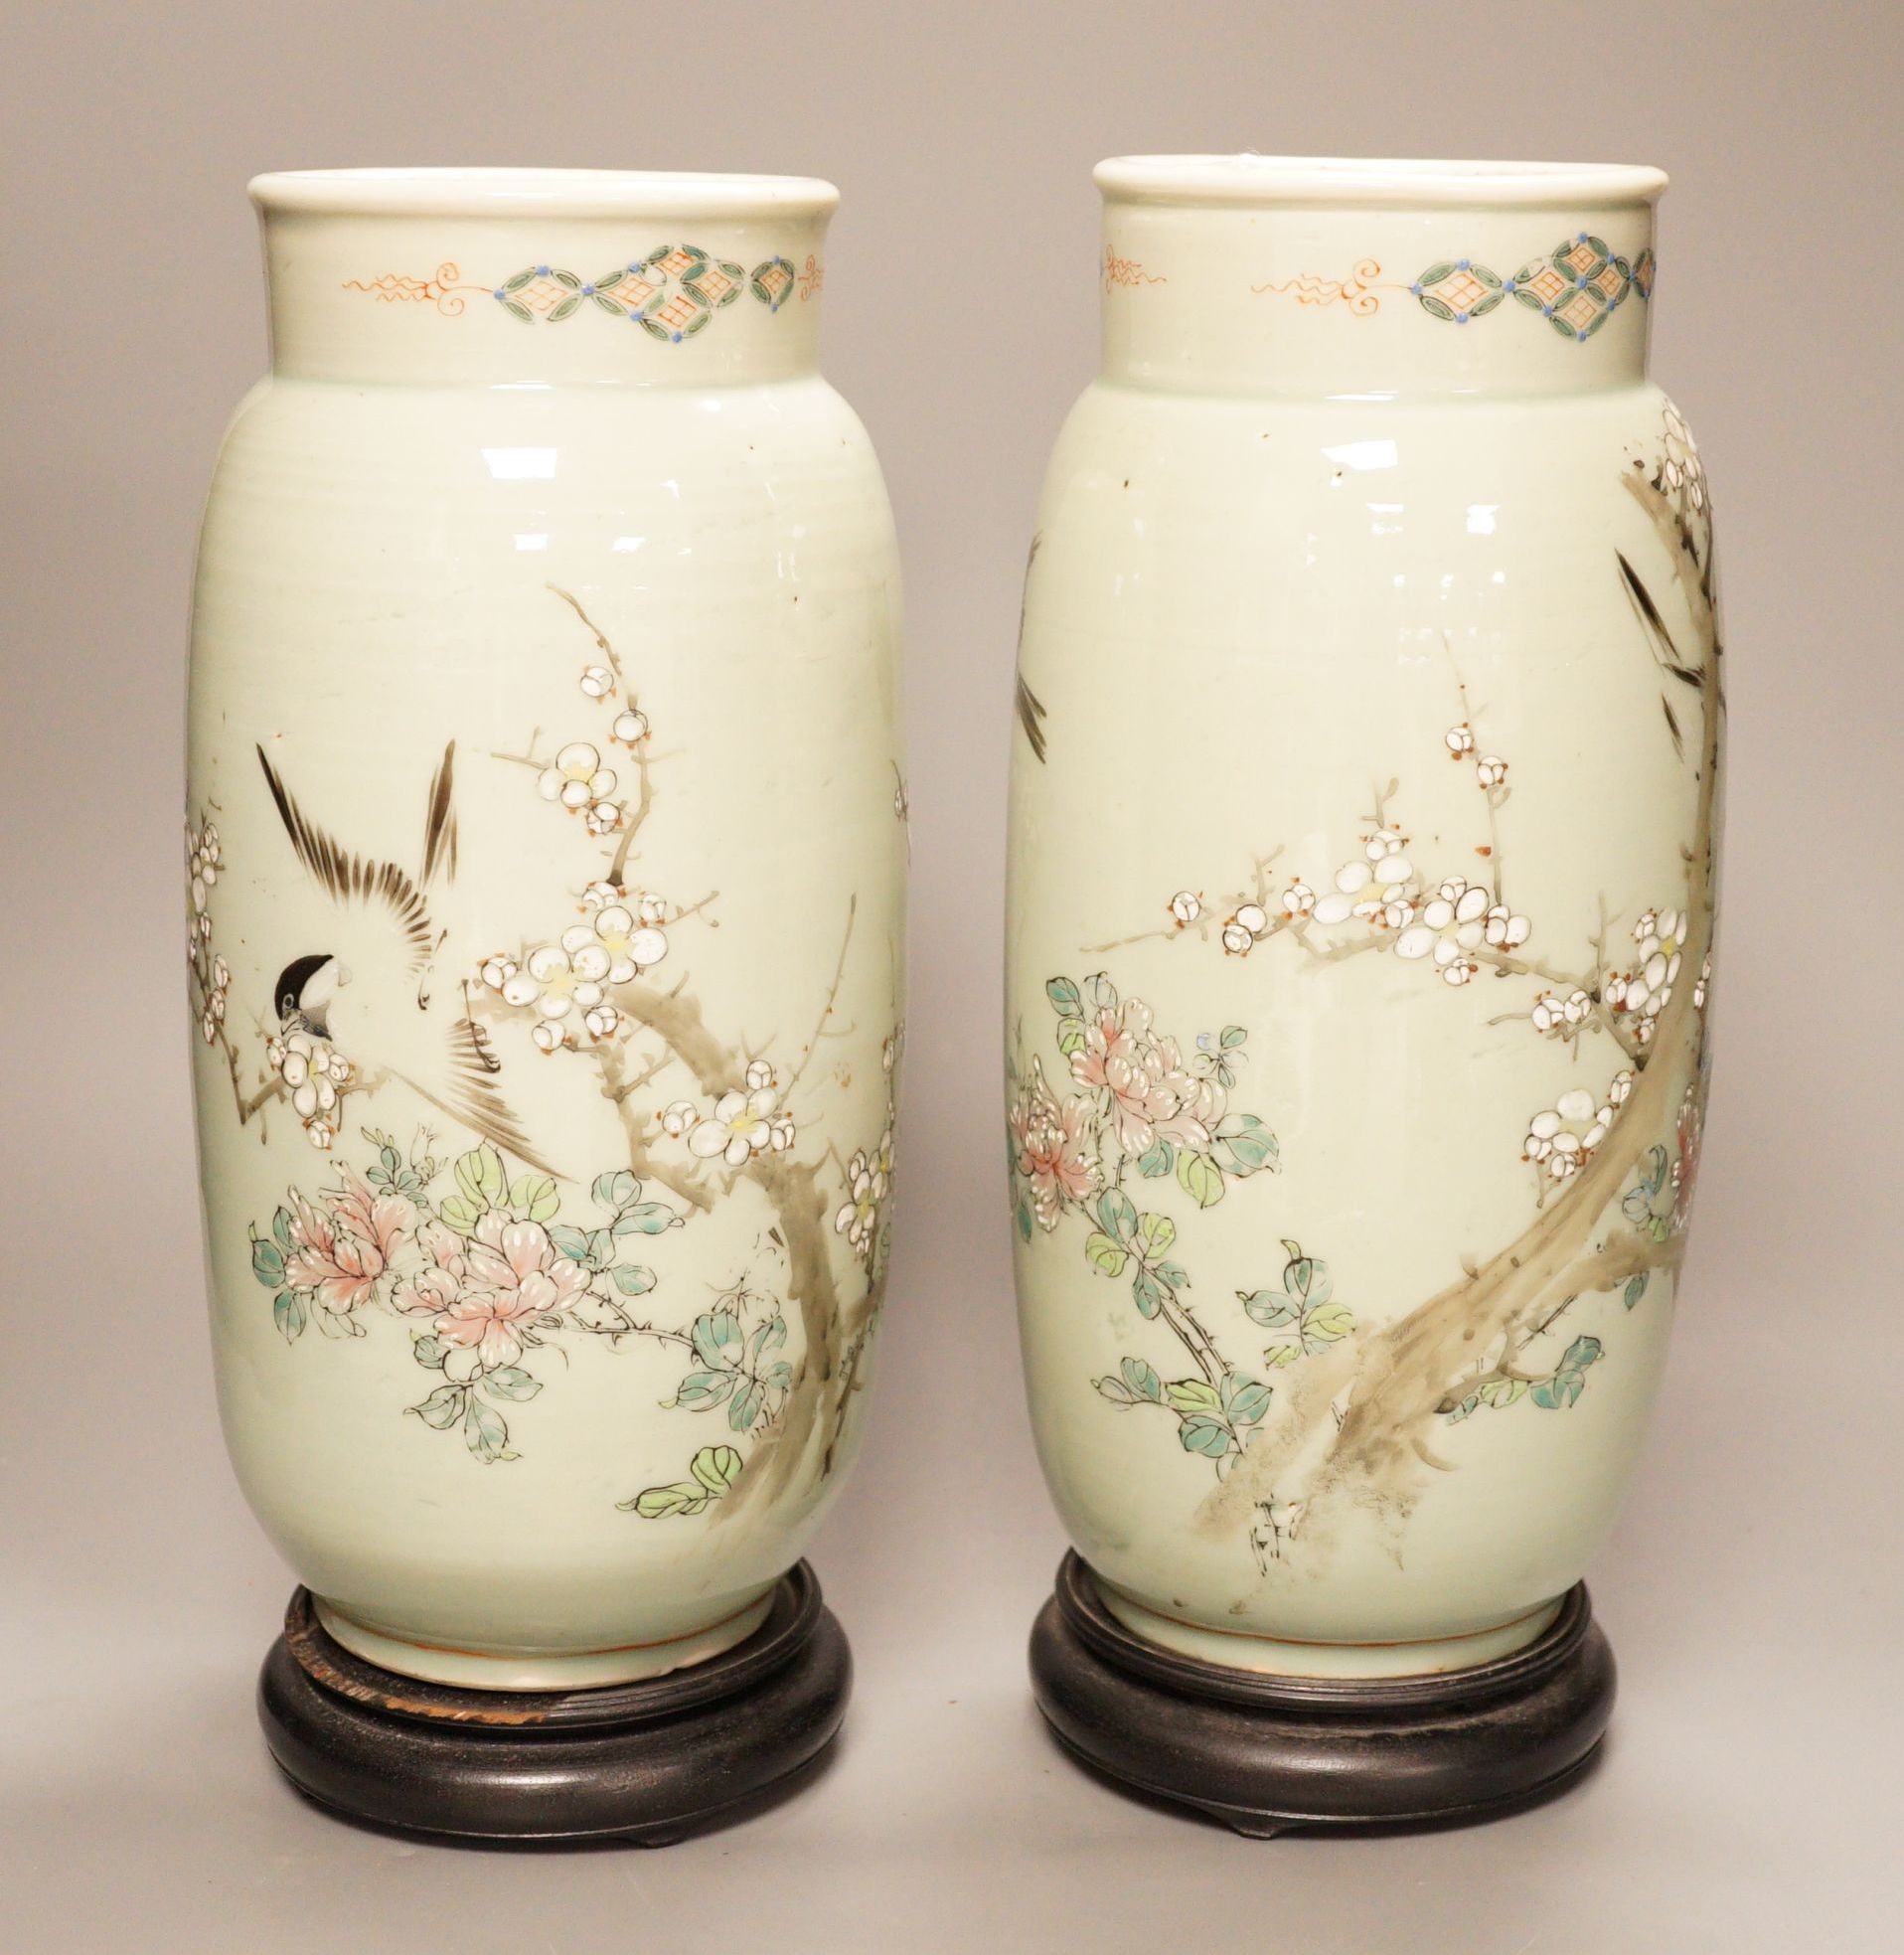 A pair of 19th century Japanese celadon glazed vases (drilled) with hardwood stands, total height